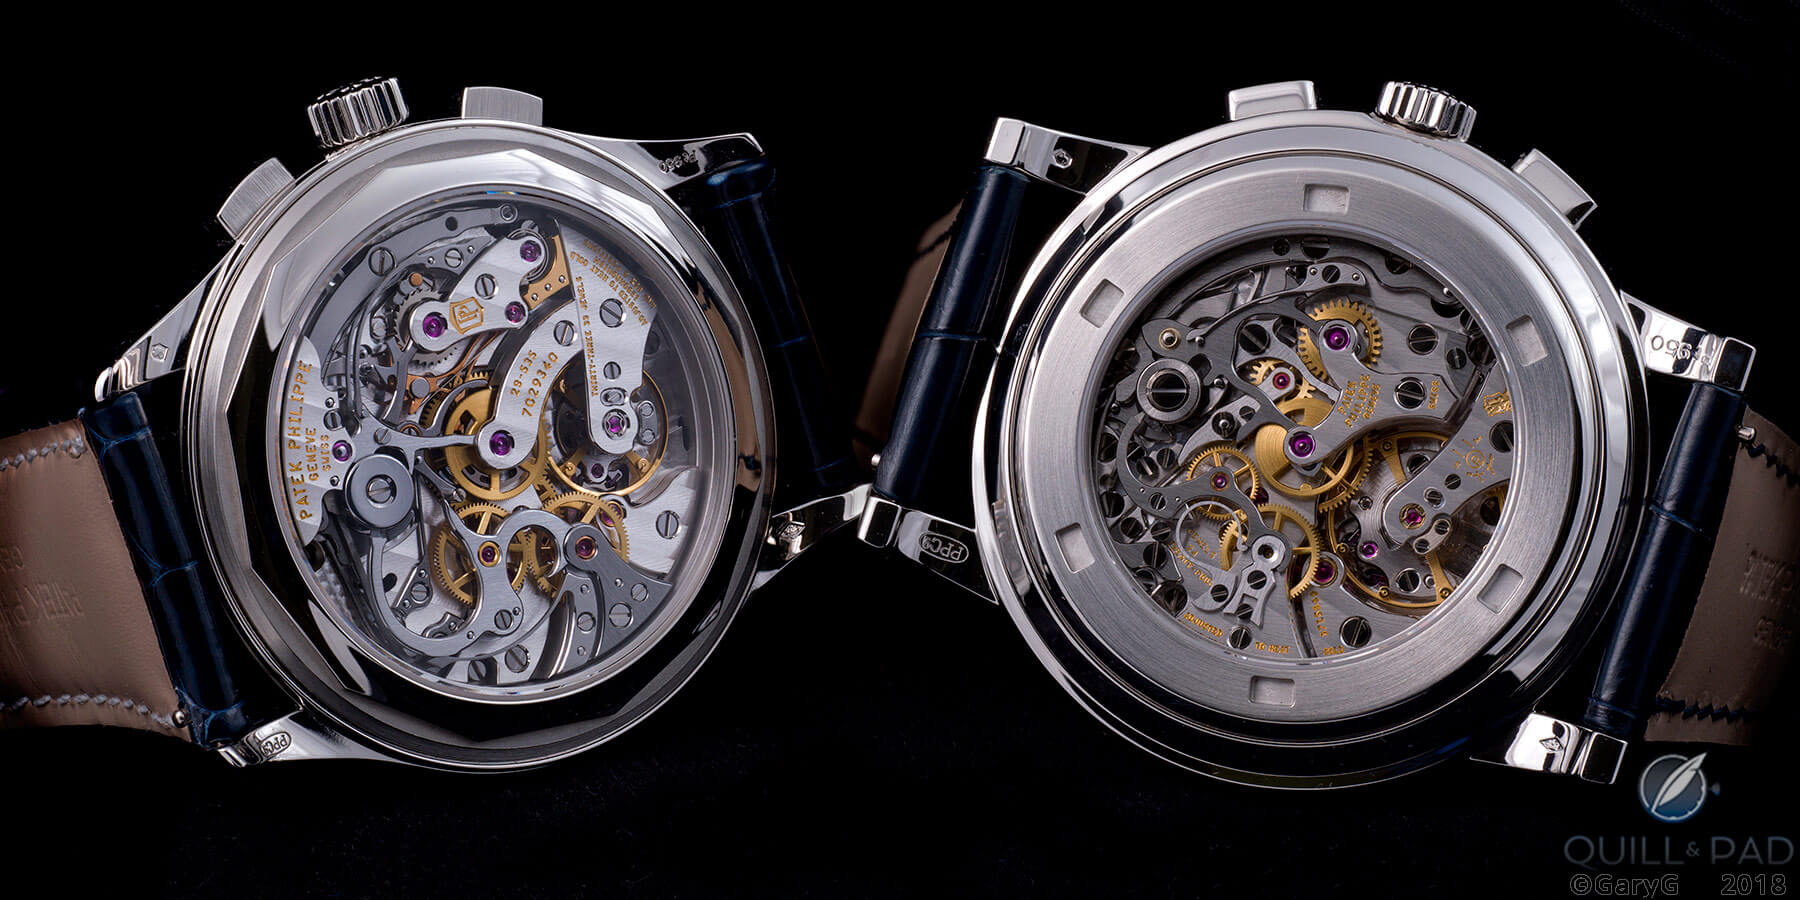 Movement views, Patek Philippe Reference 5170P (left) and Reference 5070P